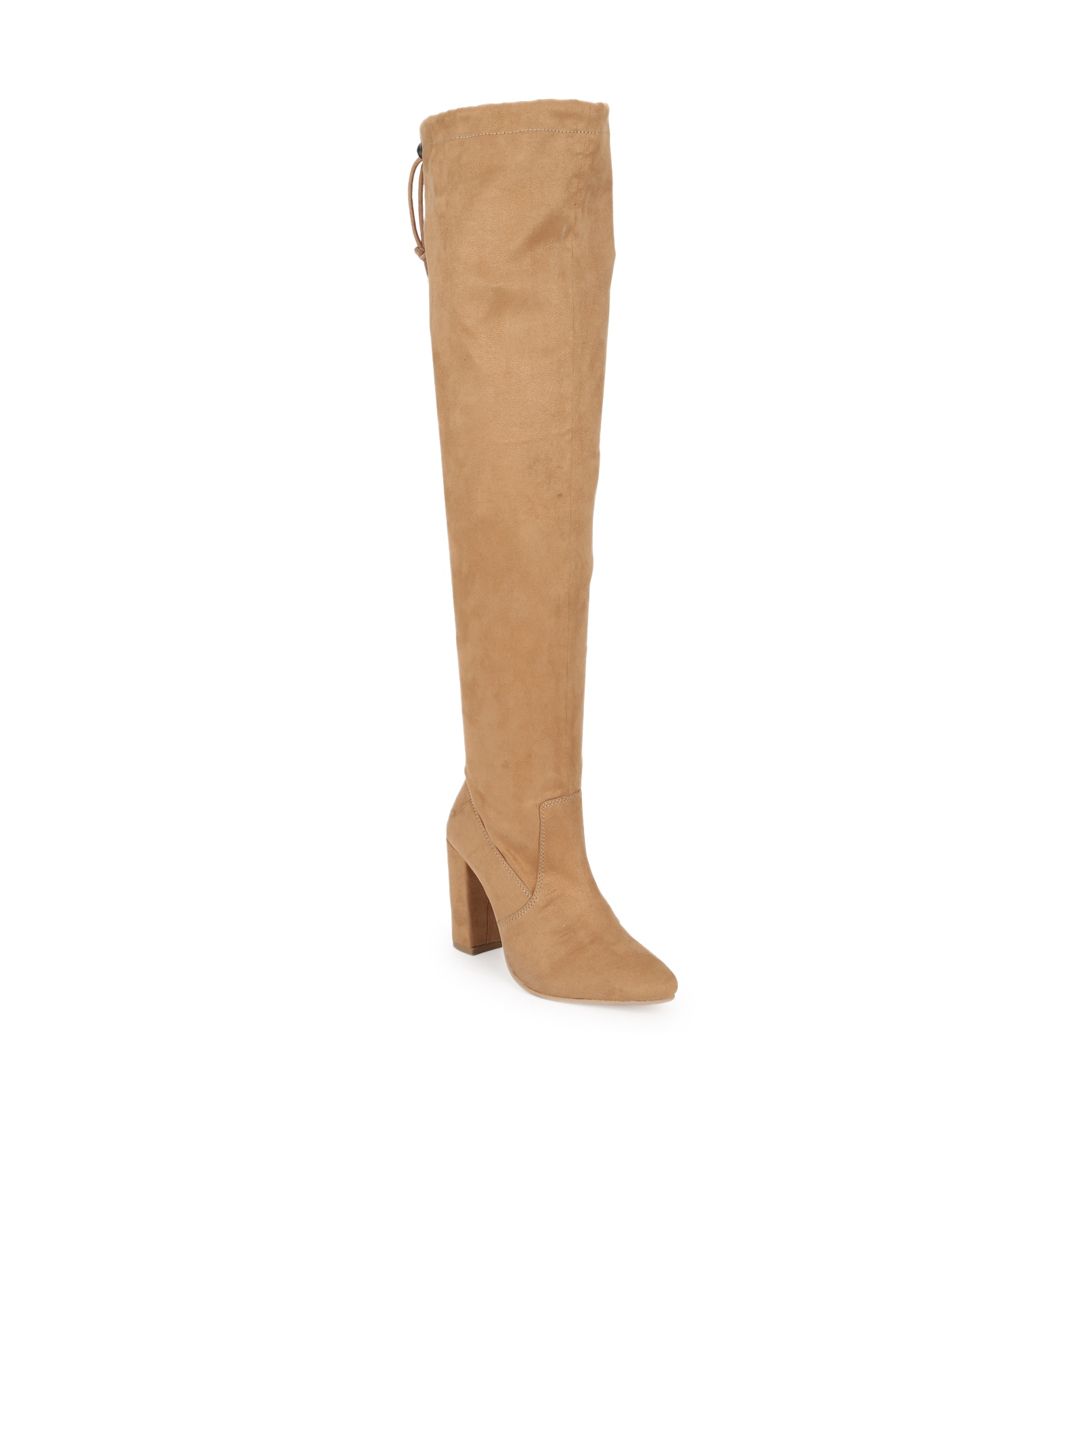 Truffle Collection Nude-Coloured High-Top Block Heeled Boots Price in India